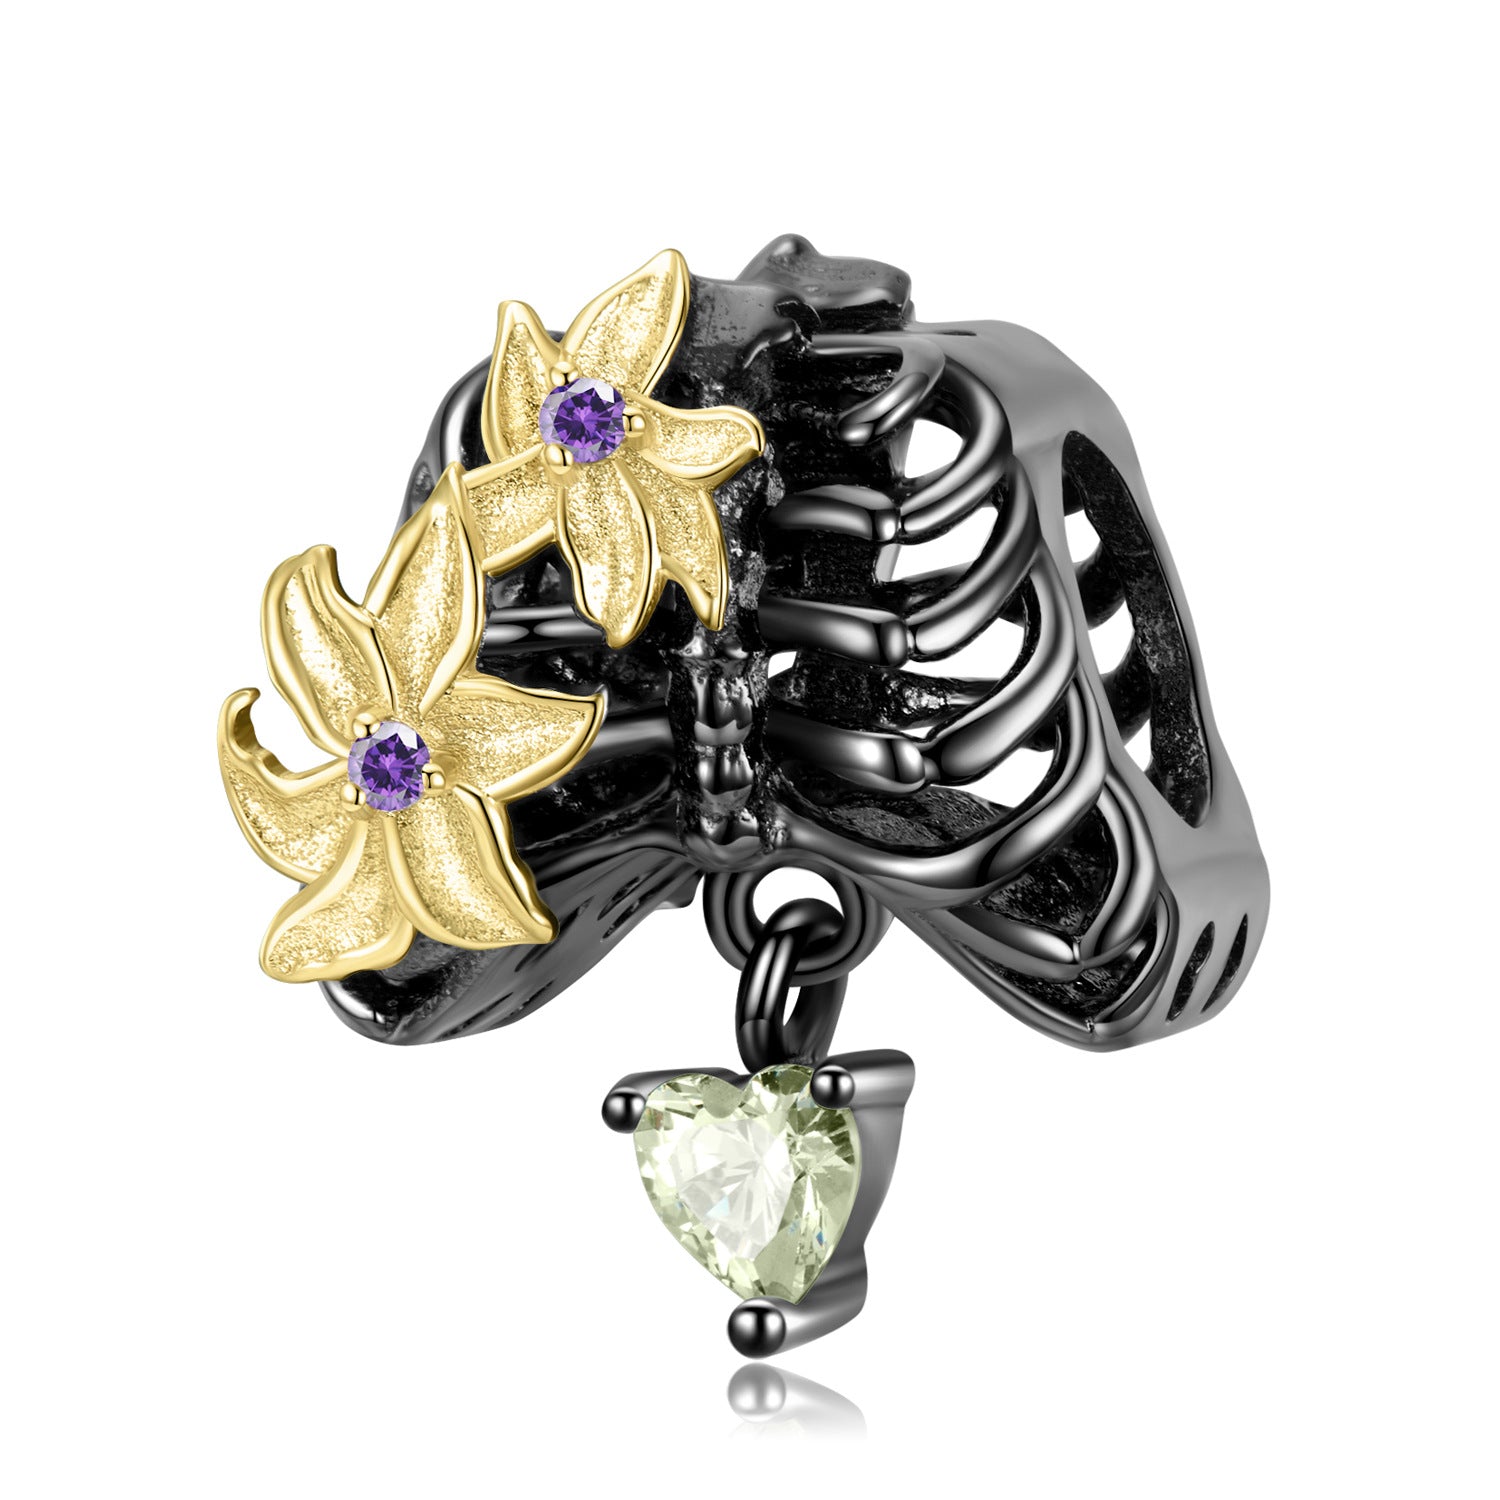 A Flowers And Skeletons Dark Gothic 925 Silver DIY Beaded Bracelet Accessories with a flower and amethyst, perfect for fashion women from Maramalive™.